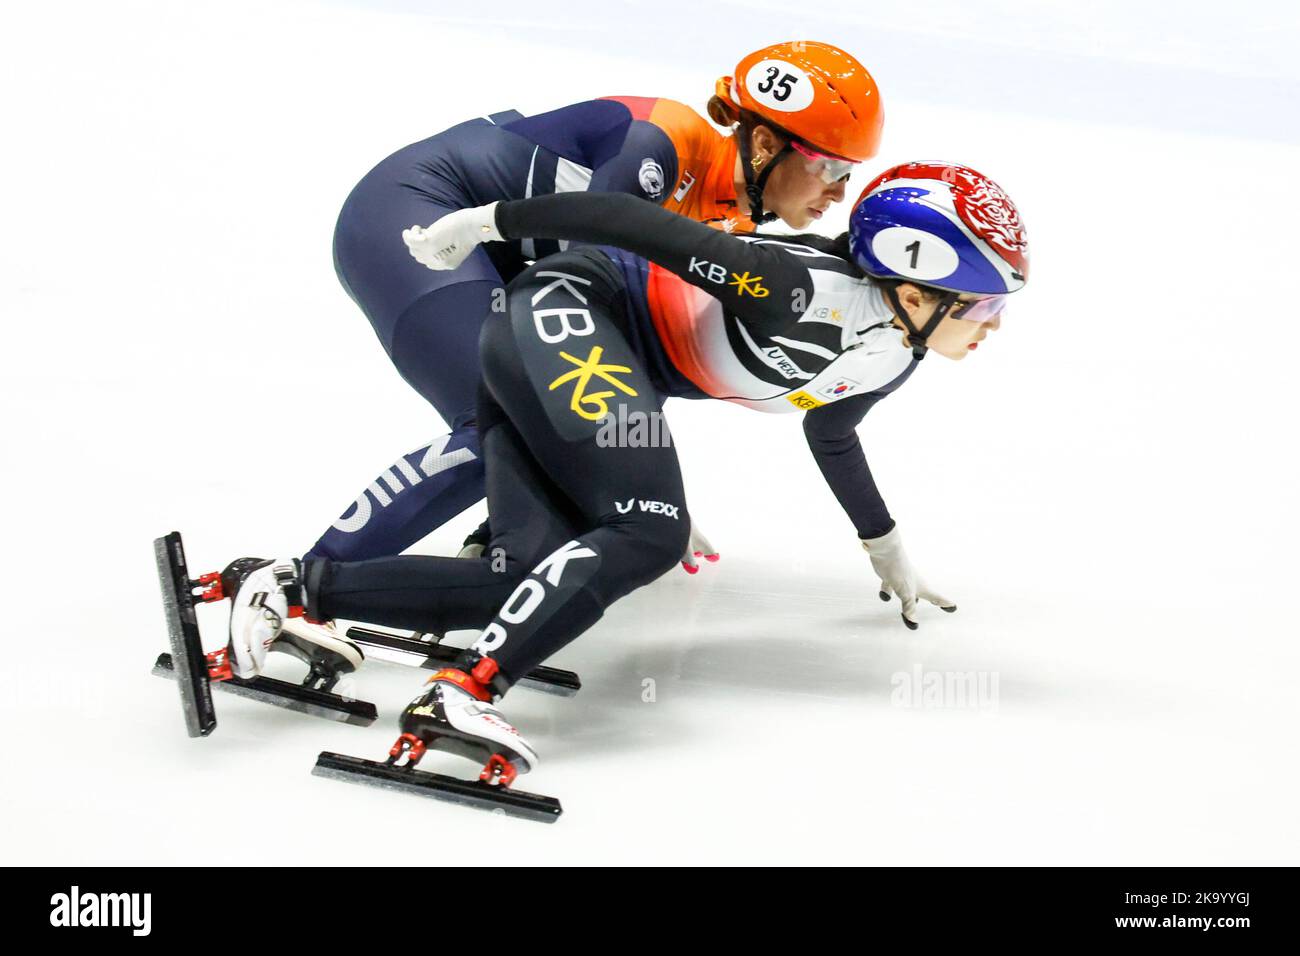 MONTREAL, CANADA - OCTOBER 30: Suzanne Schulting of The Netherlands competing during the Short Track Speed Skating World Cup at the Maurice-Richard Arena on October 30, 2022 in Montreal, Canada (Photo by Martin Chamberland/Orange Pictures) Stock Photo